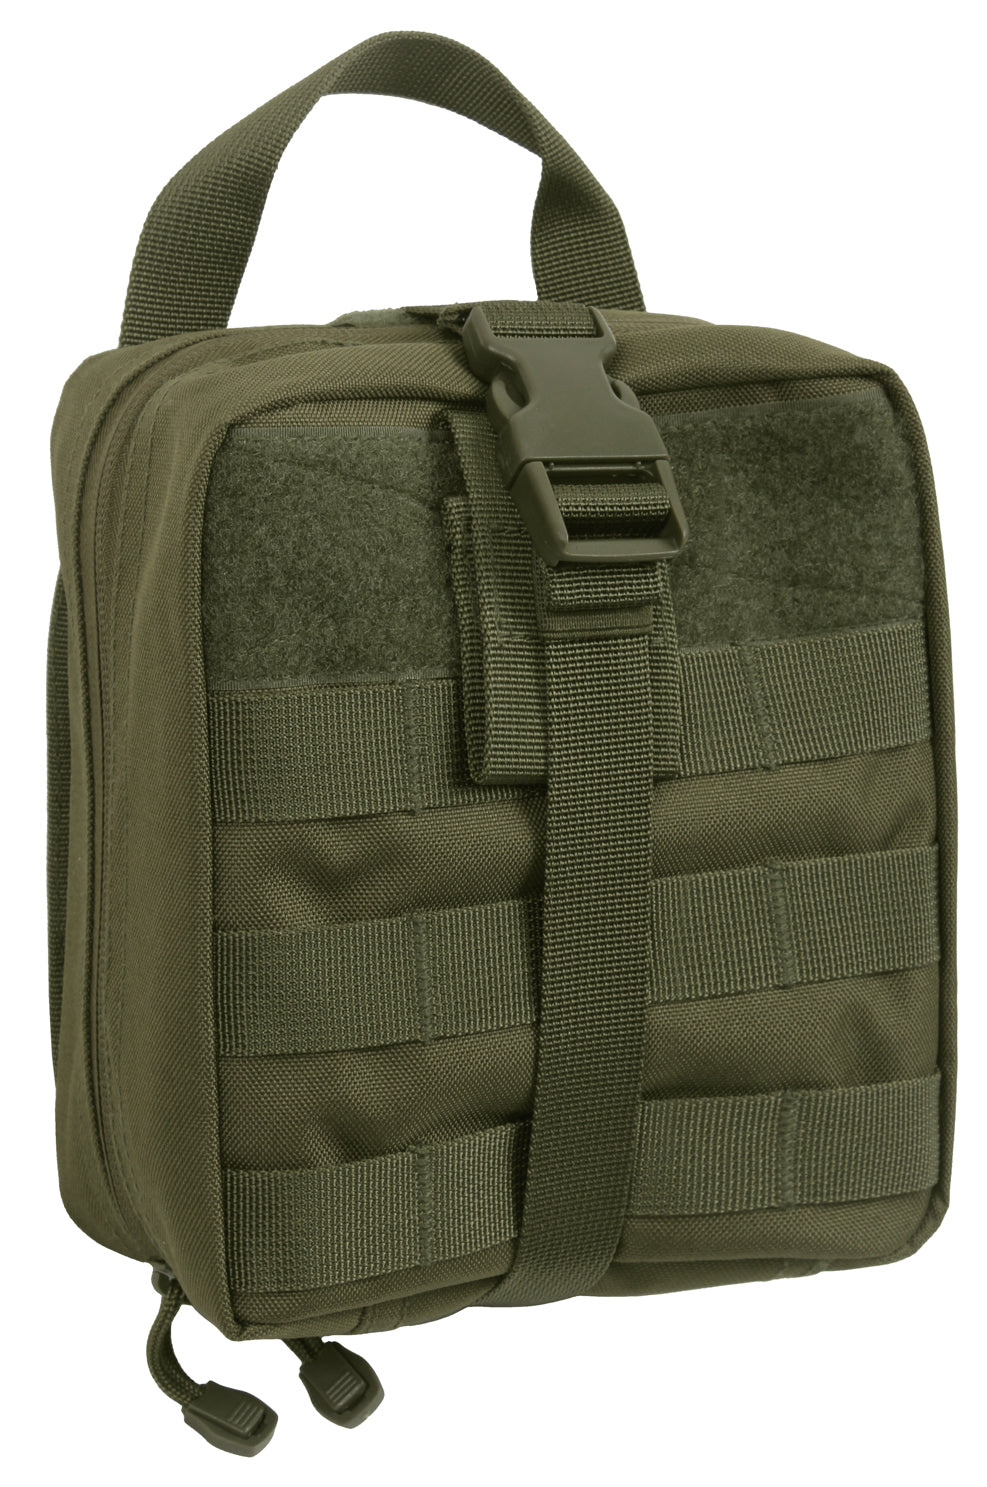 Tactical MOLLE Breakaway Pouch